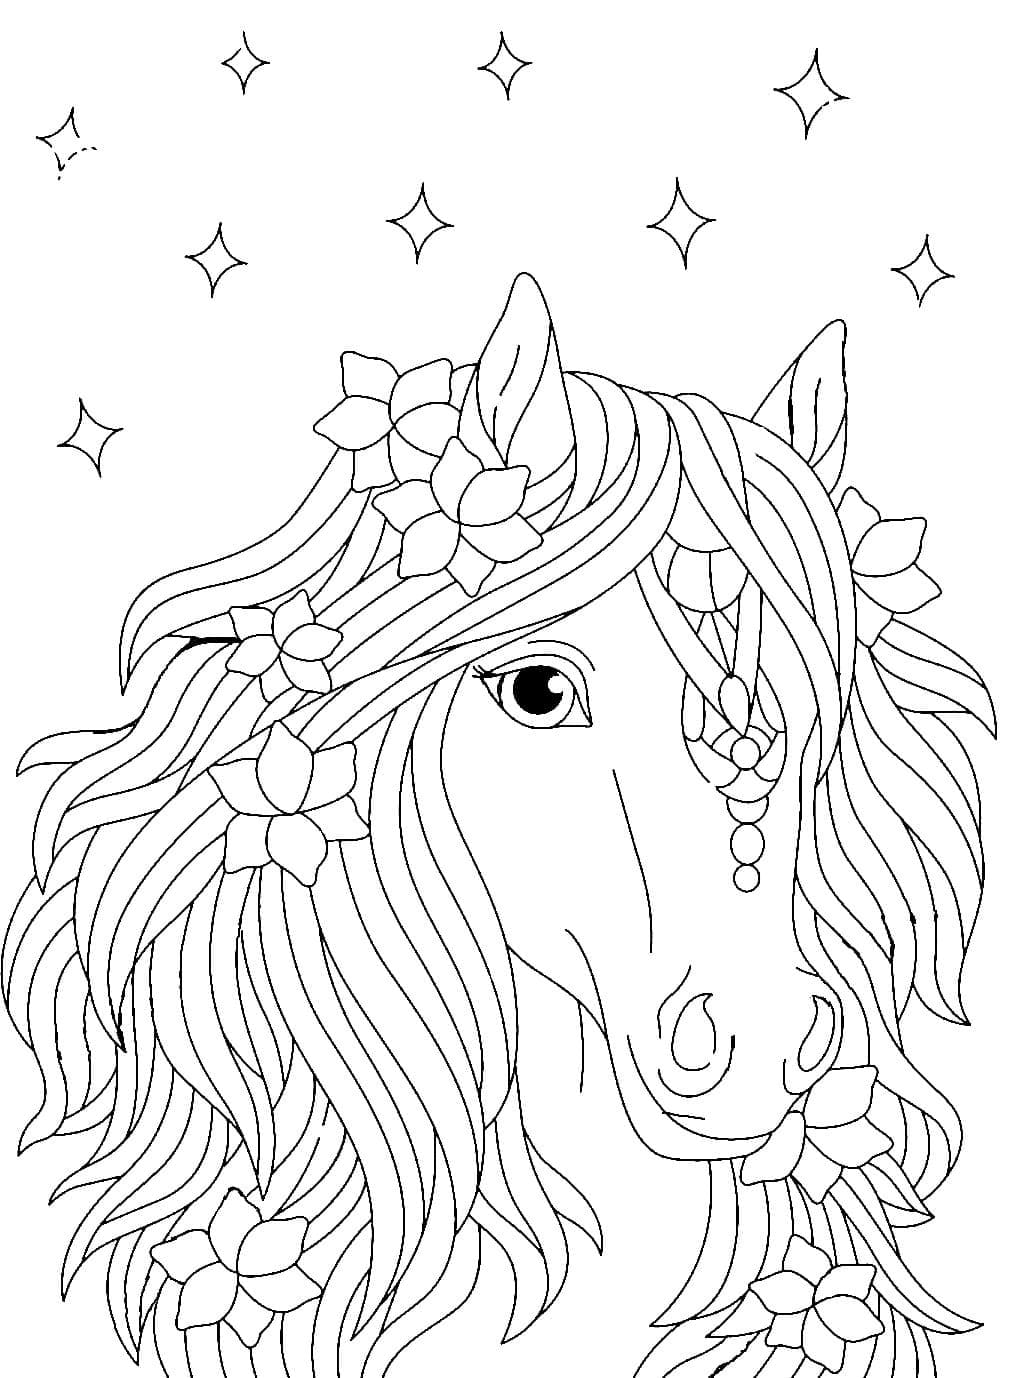 Horse coloring pages - ColoringLib